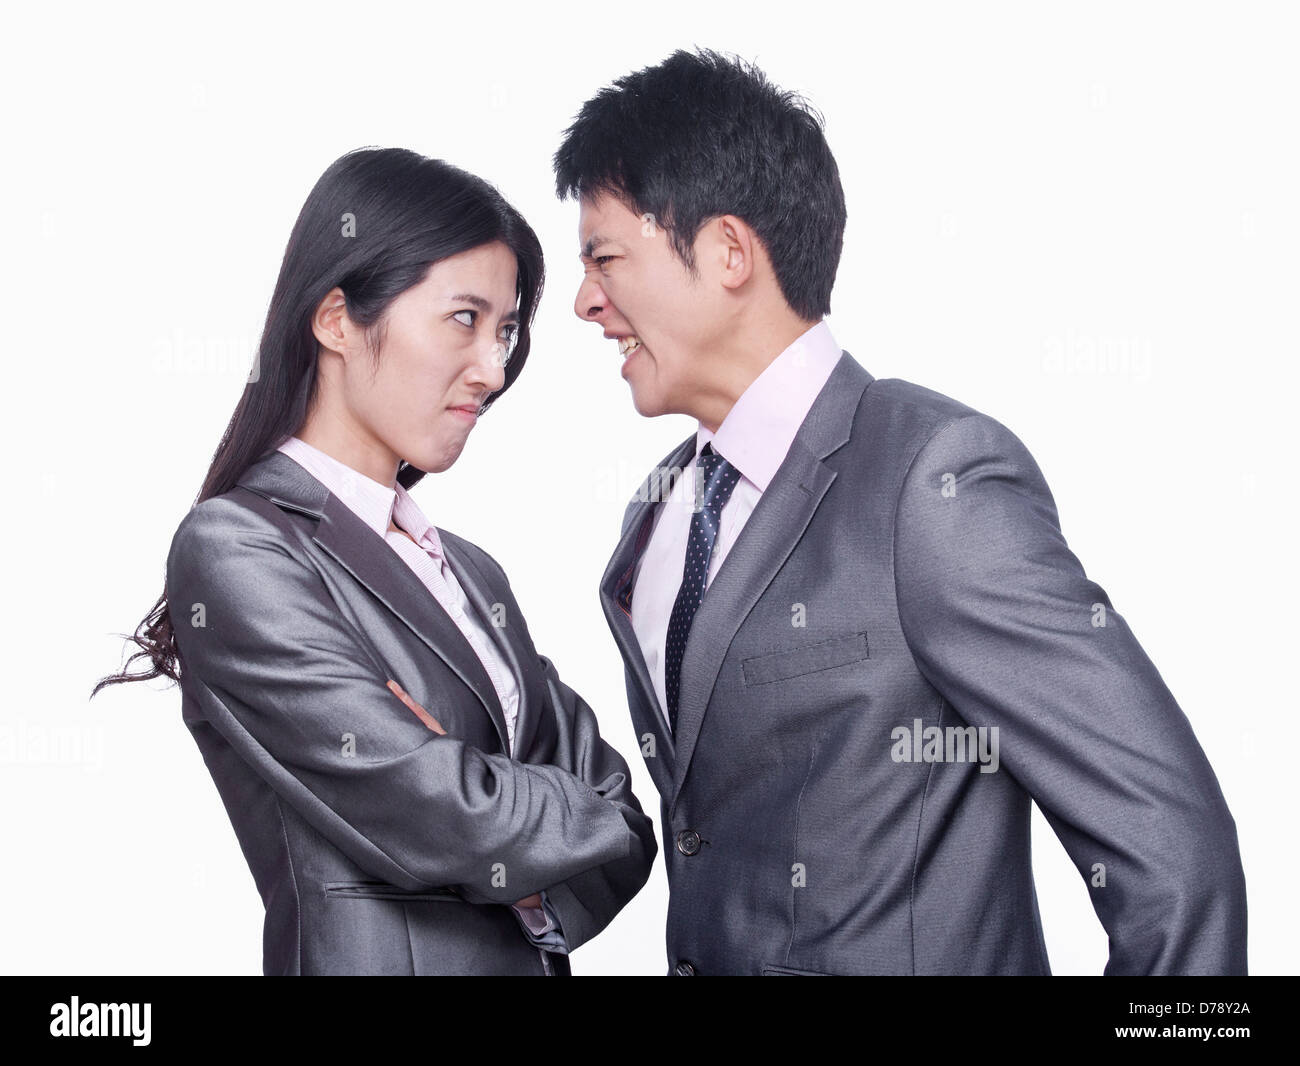 Businessman and businesswoman angry at each other Stock Photo